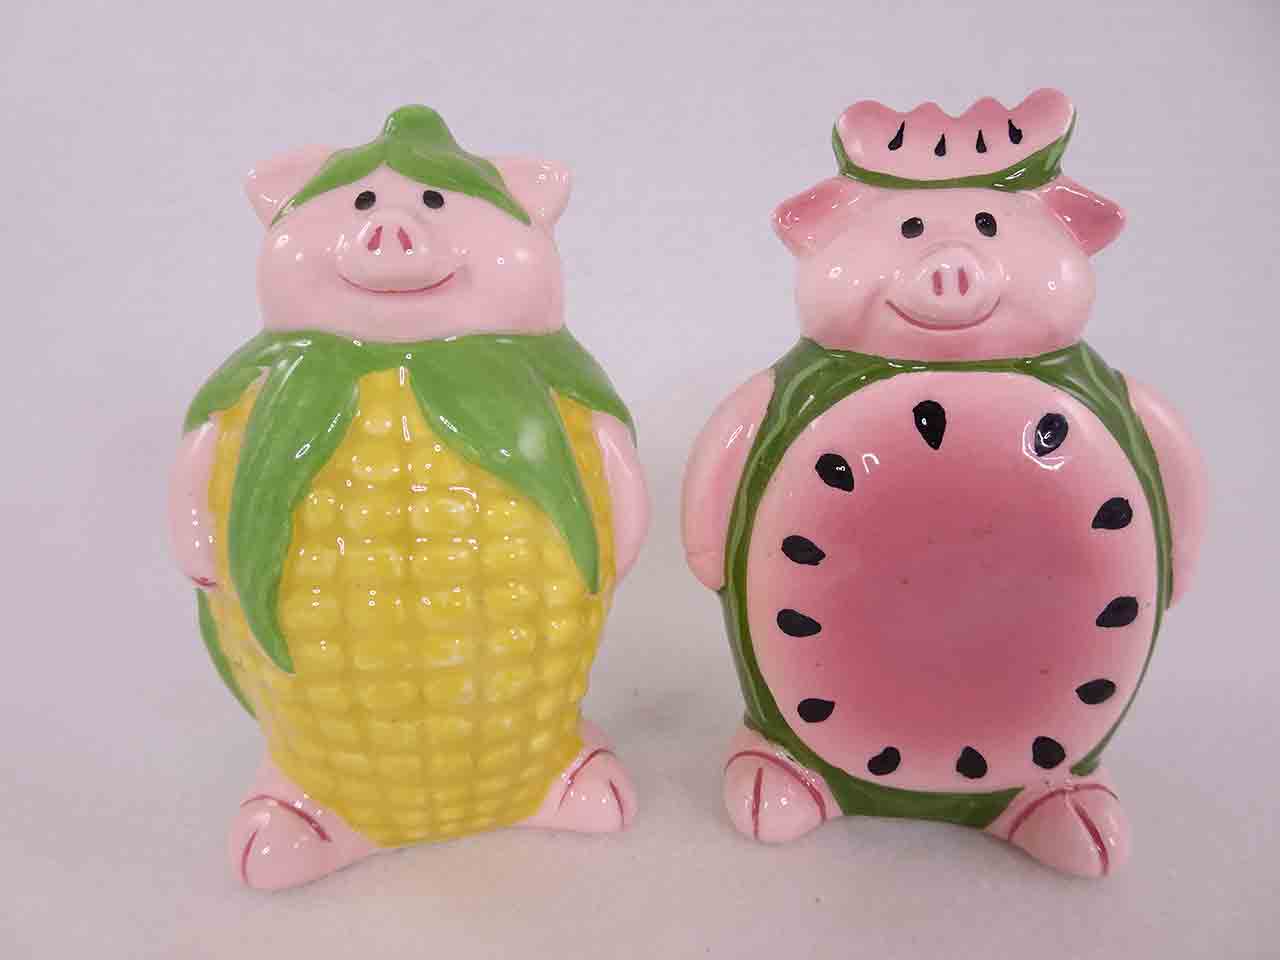 Clay Art Animals in Costumes salt and pepper shakers - pigs dressed up as corn and a watermelon